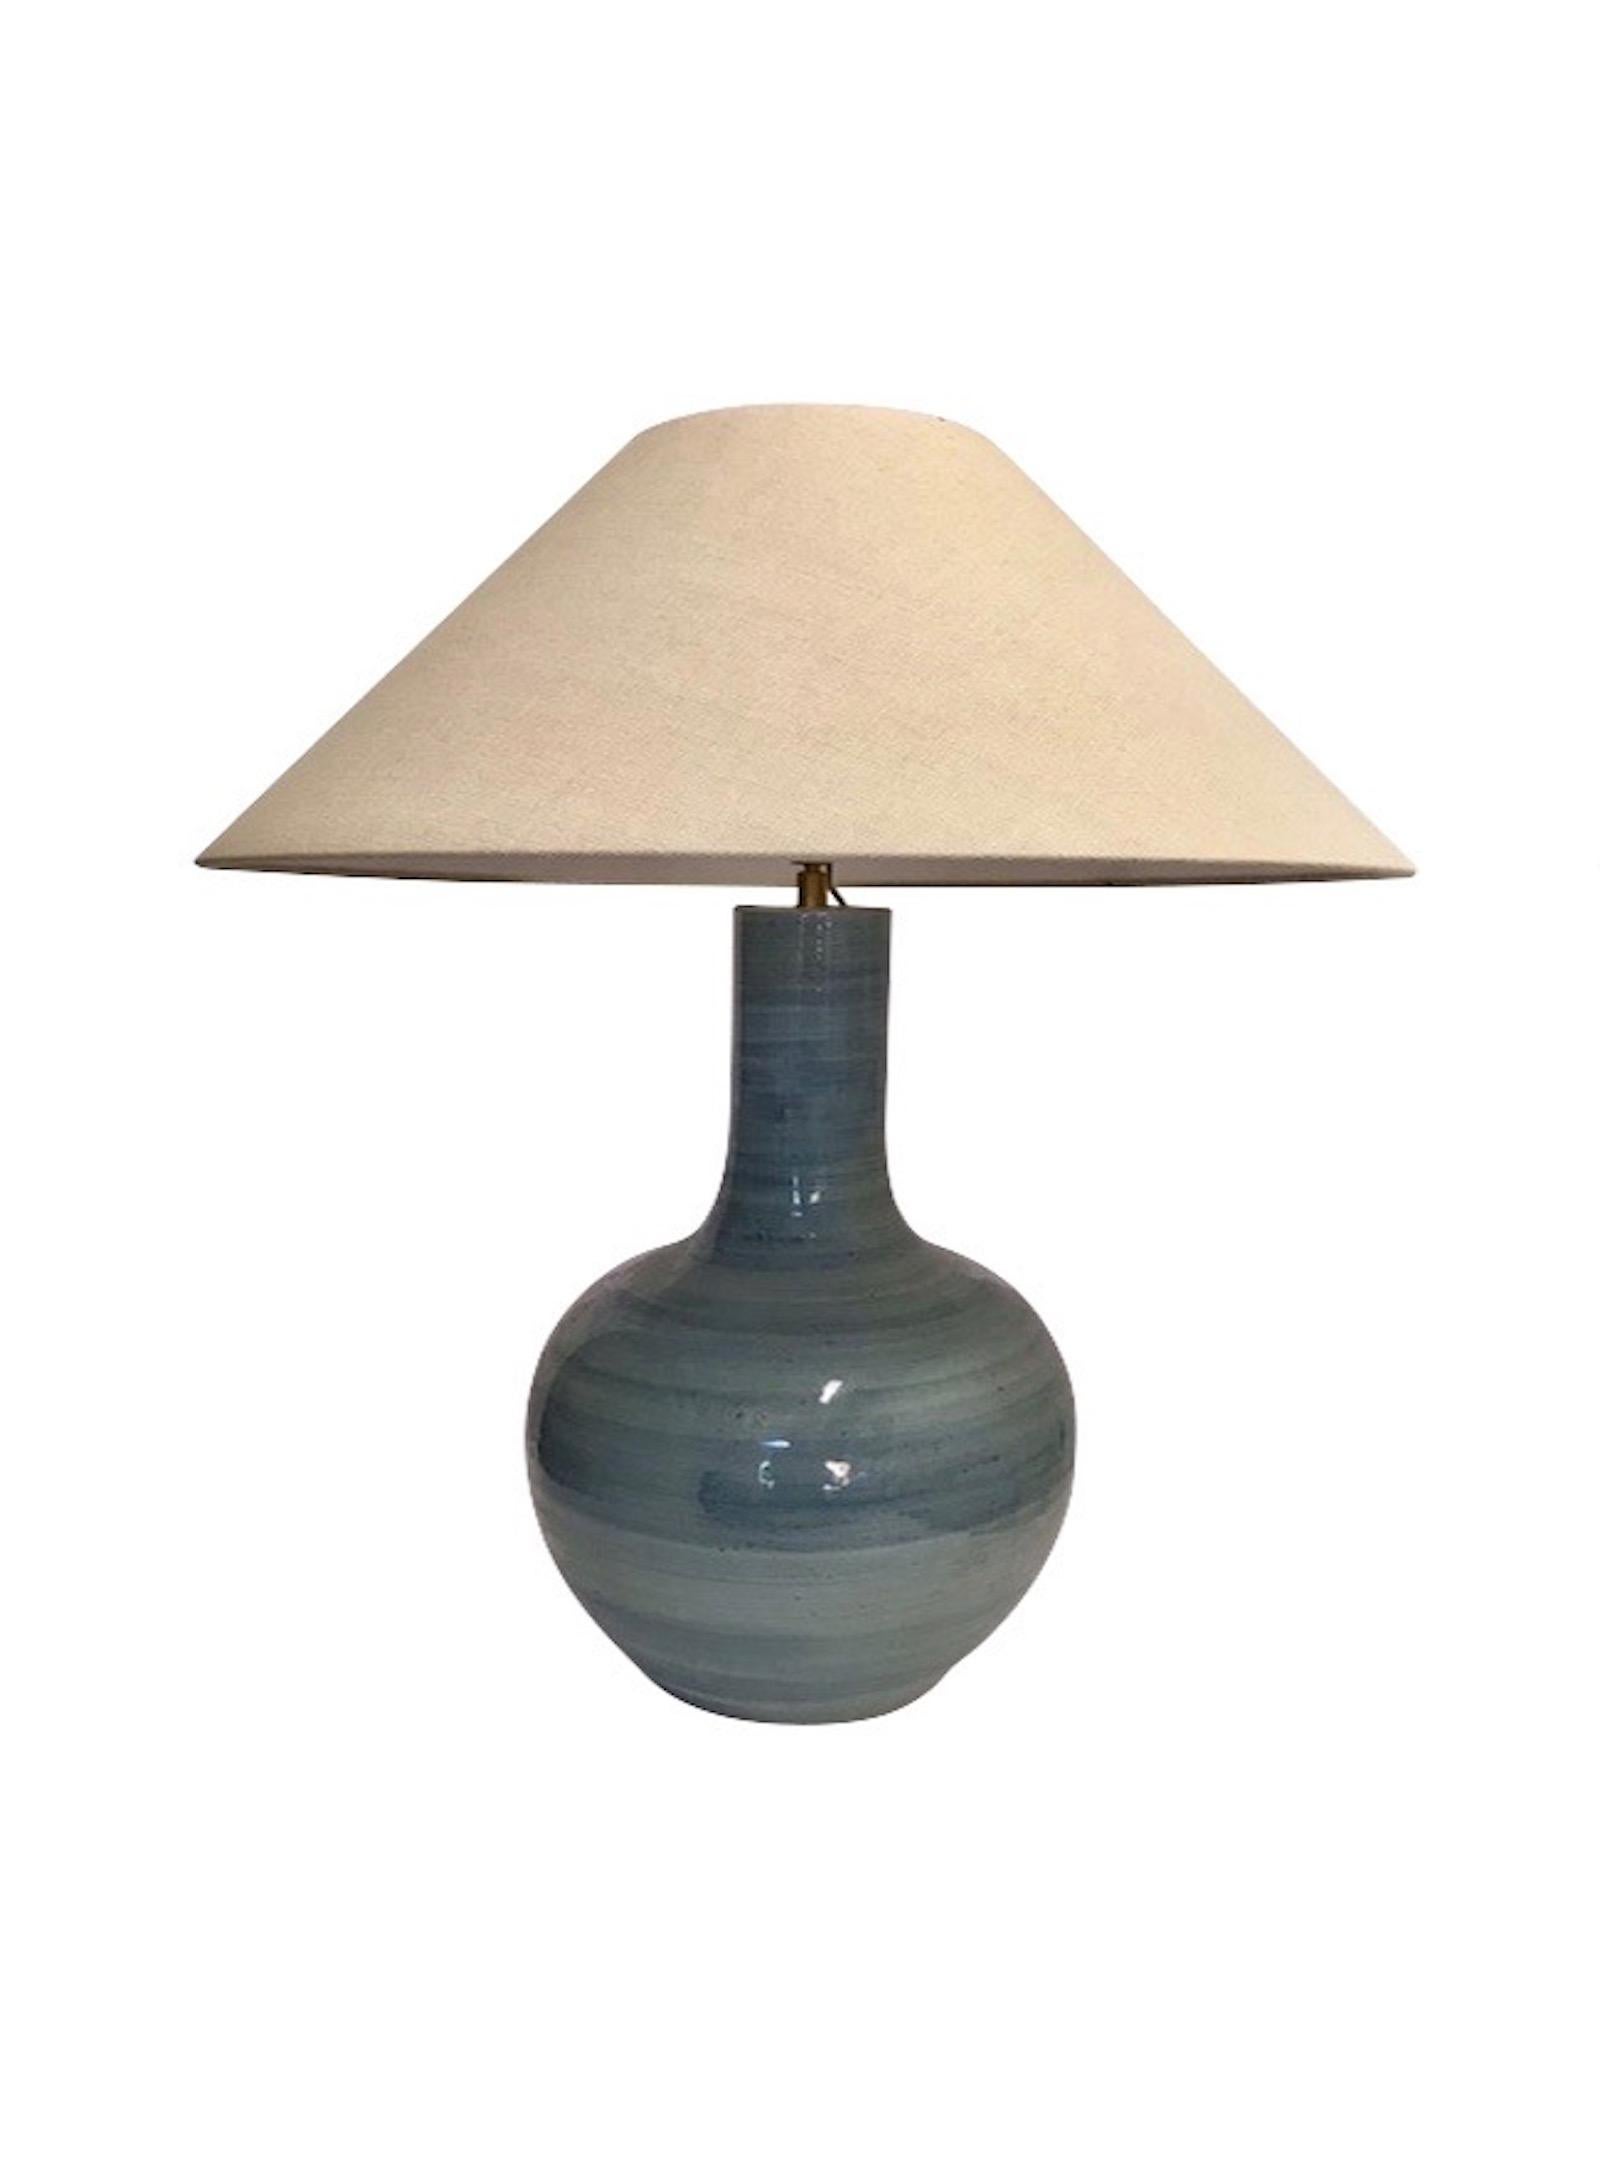 Pair of large turquoise terra cotta thin neck lamps.
Horizontal brush pattern.
Measures: Overall height including shade 28